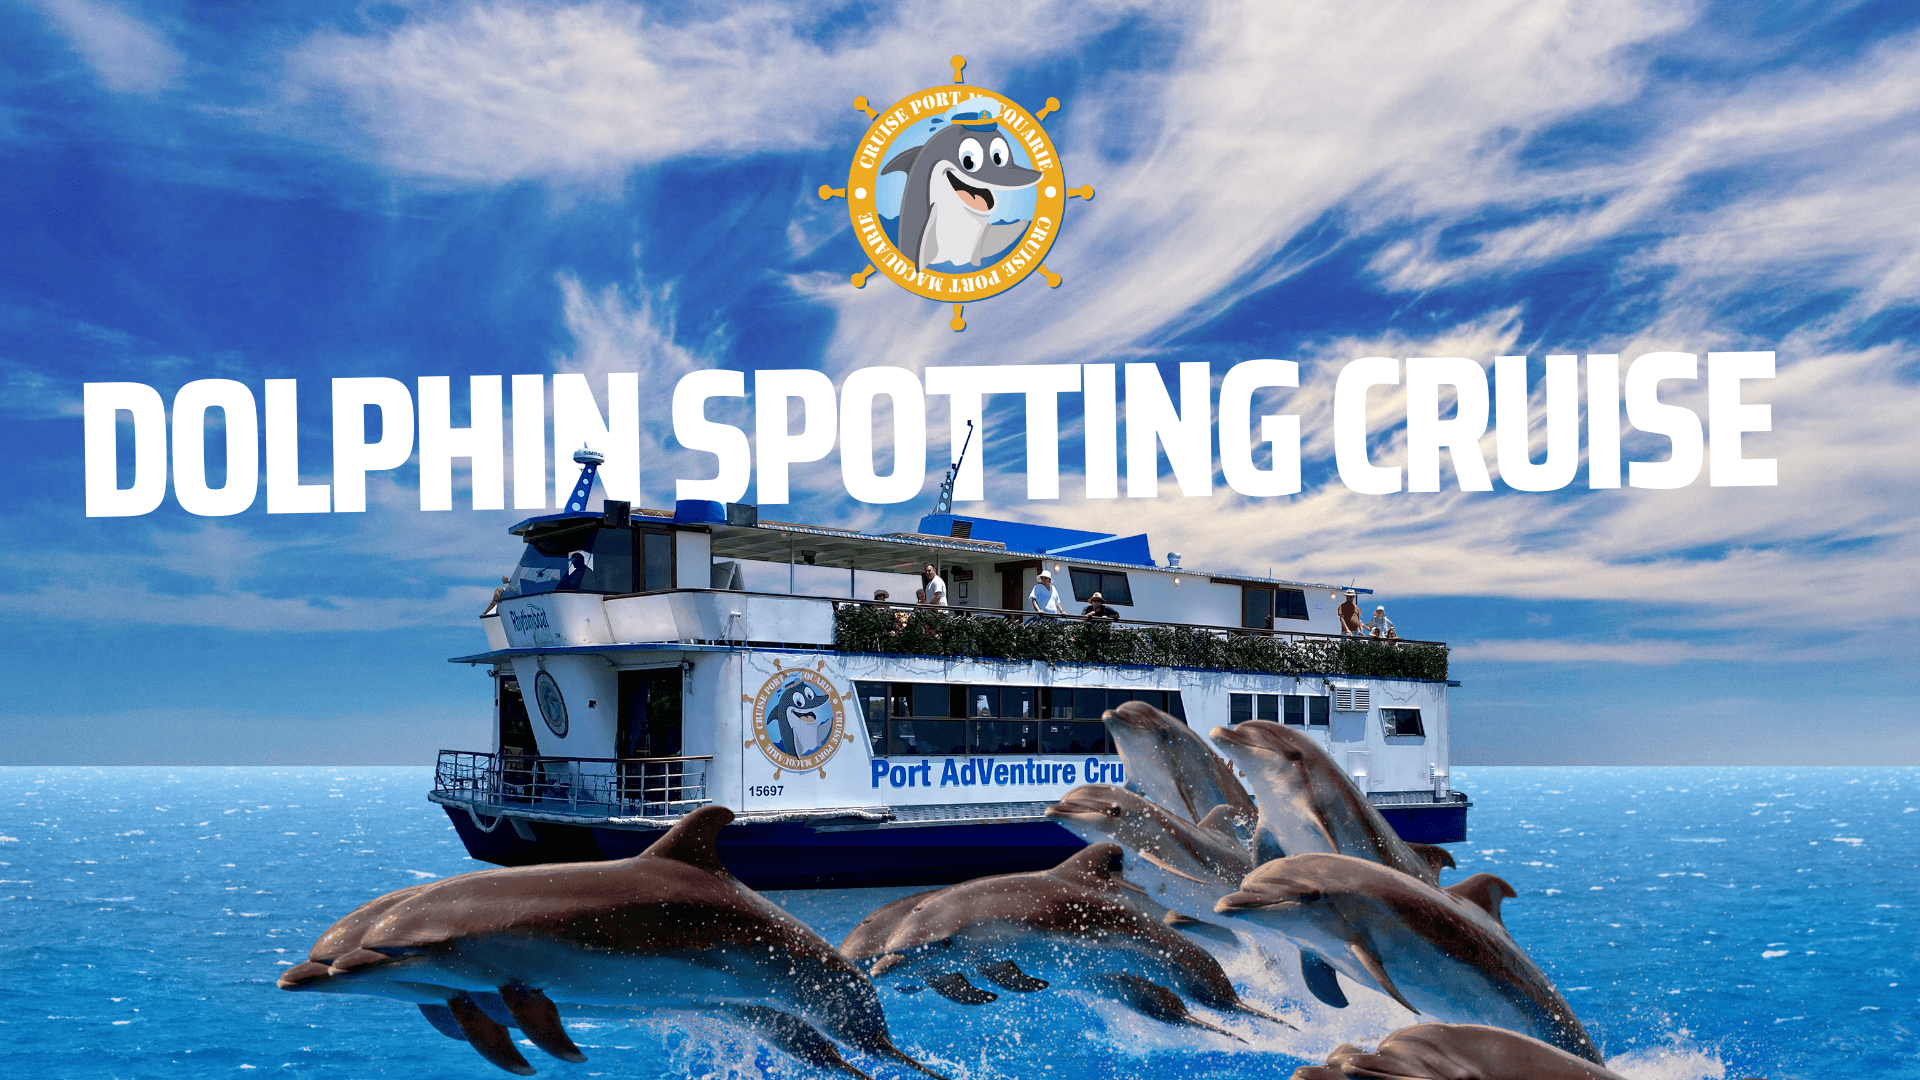 Dolphin Spotting River Cruise